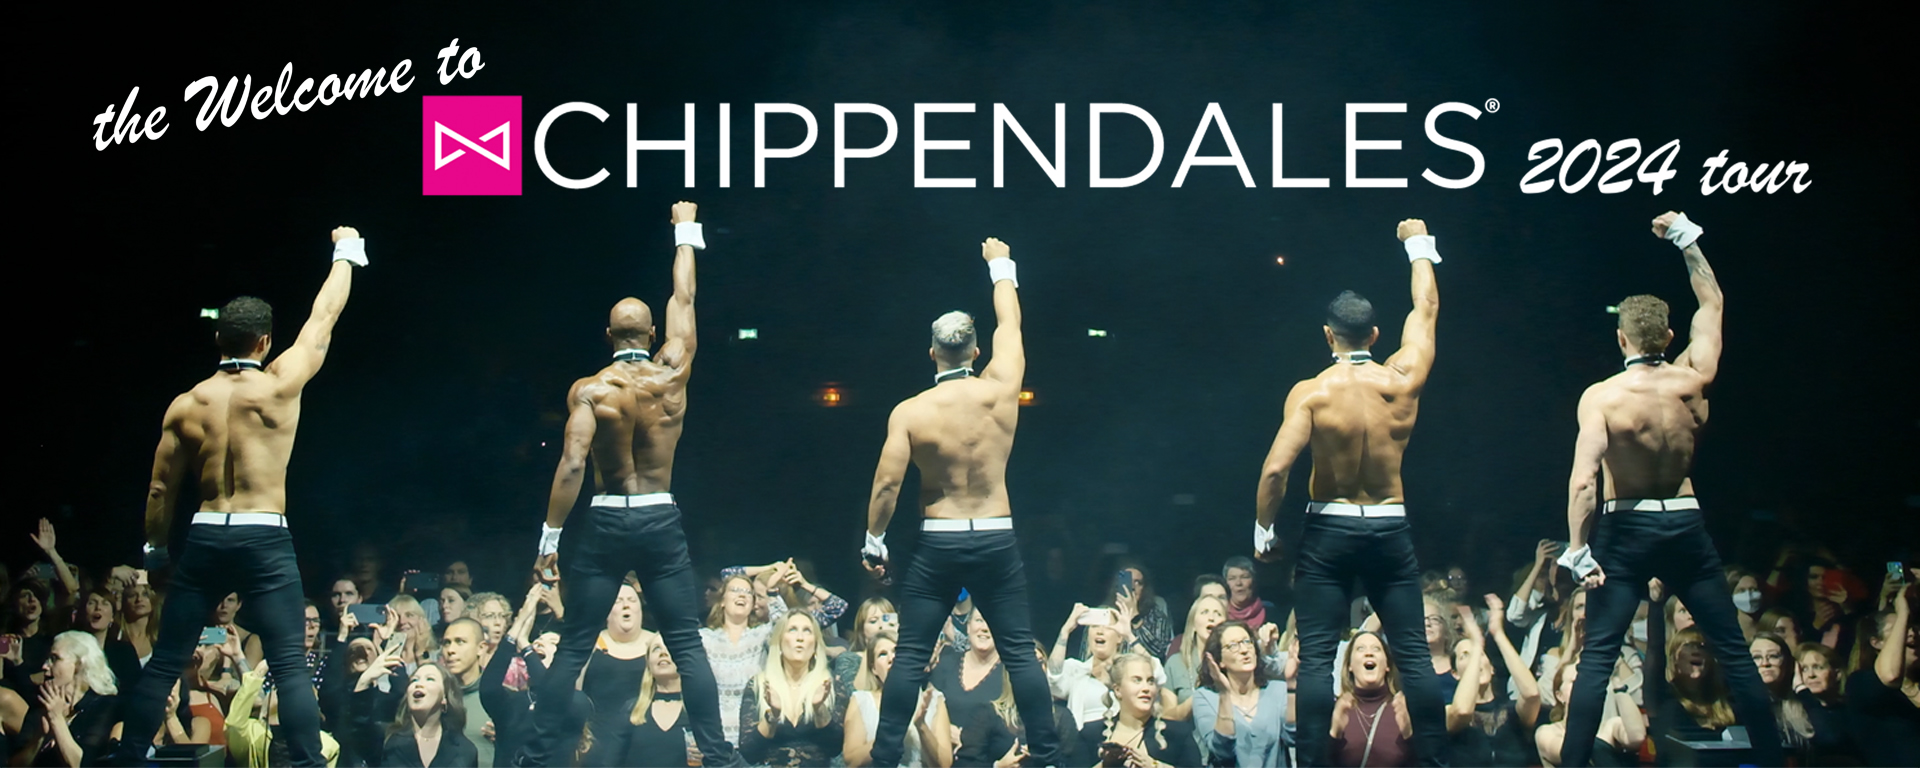 The Chippendales World Tour 2024